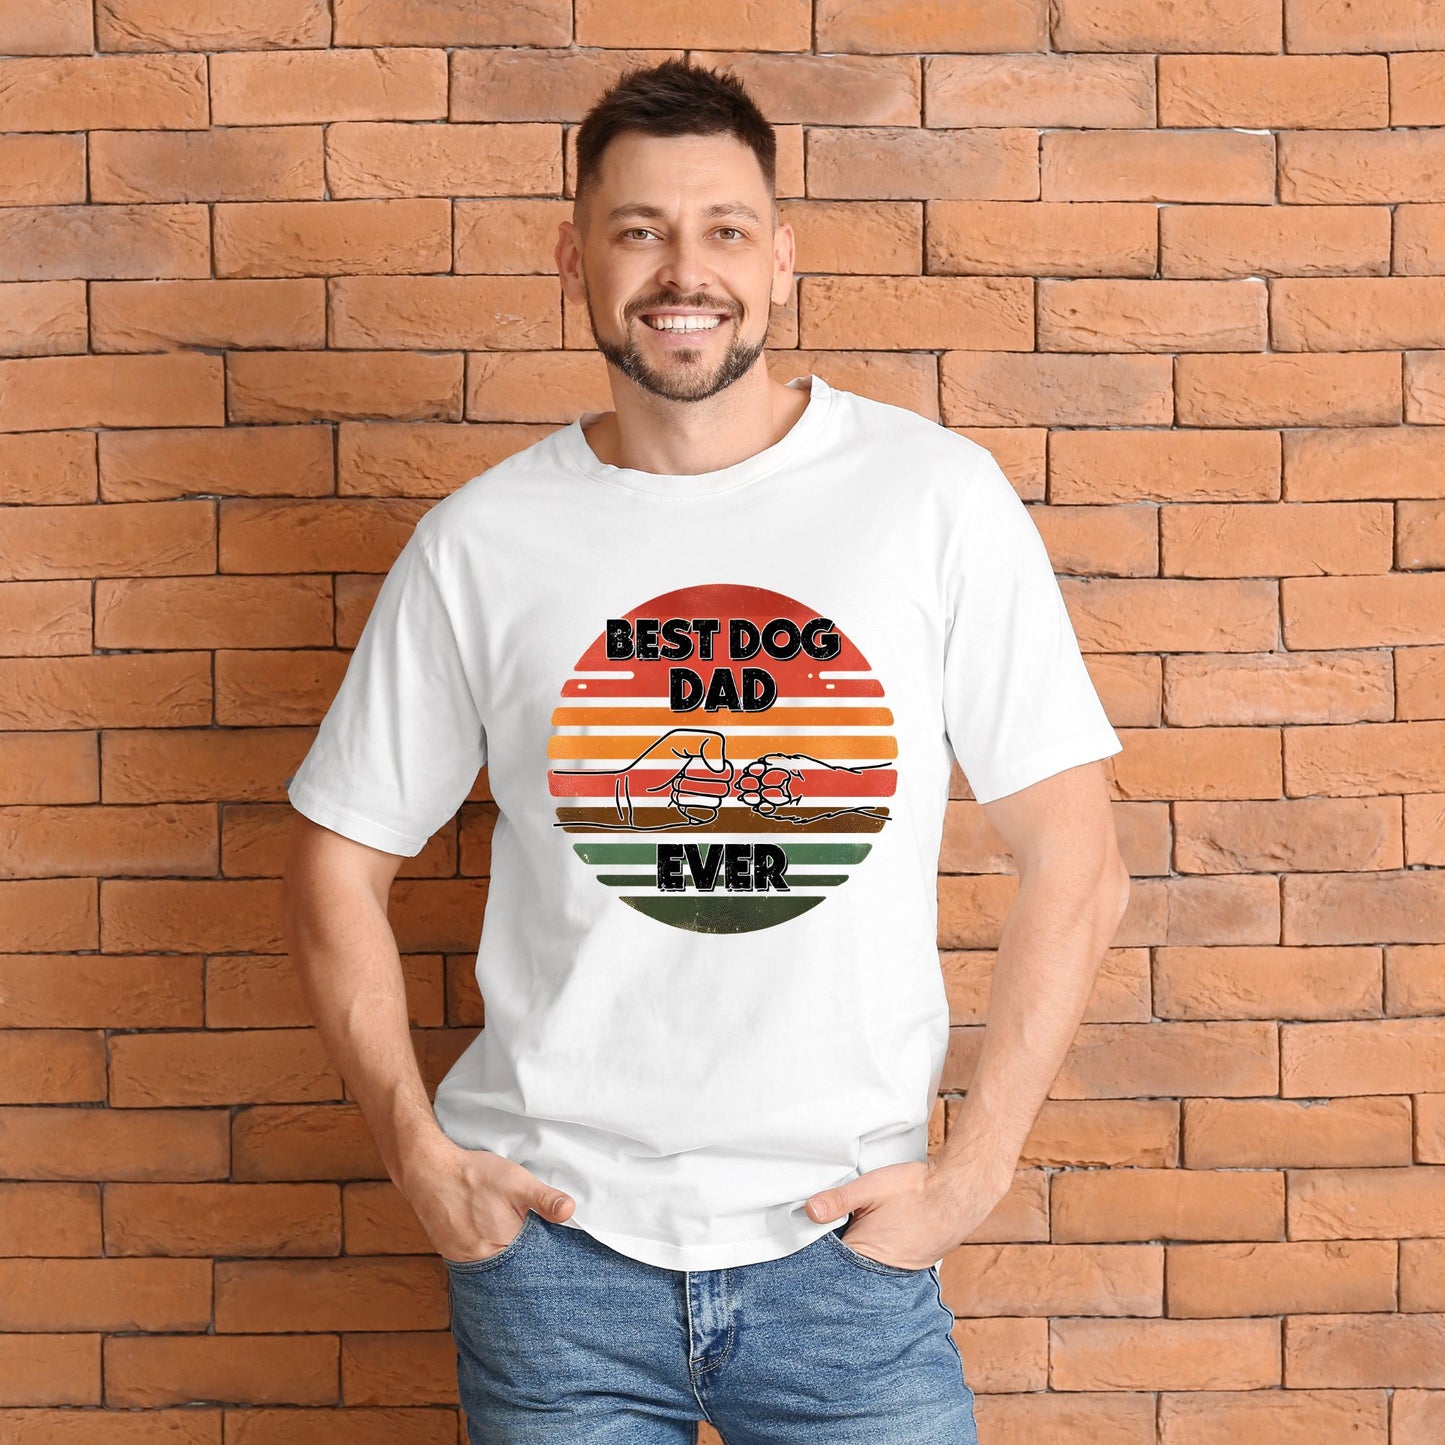 Best Dog Dad Ever (A) - Short Sleeved T-Shirts for Father's Day